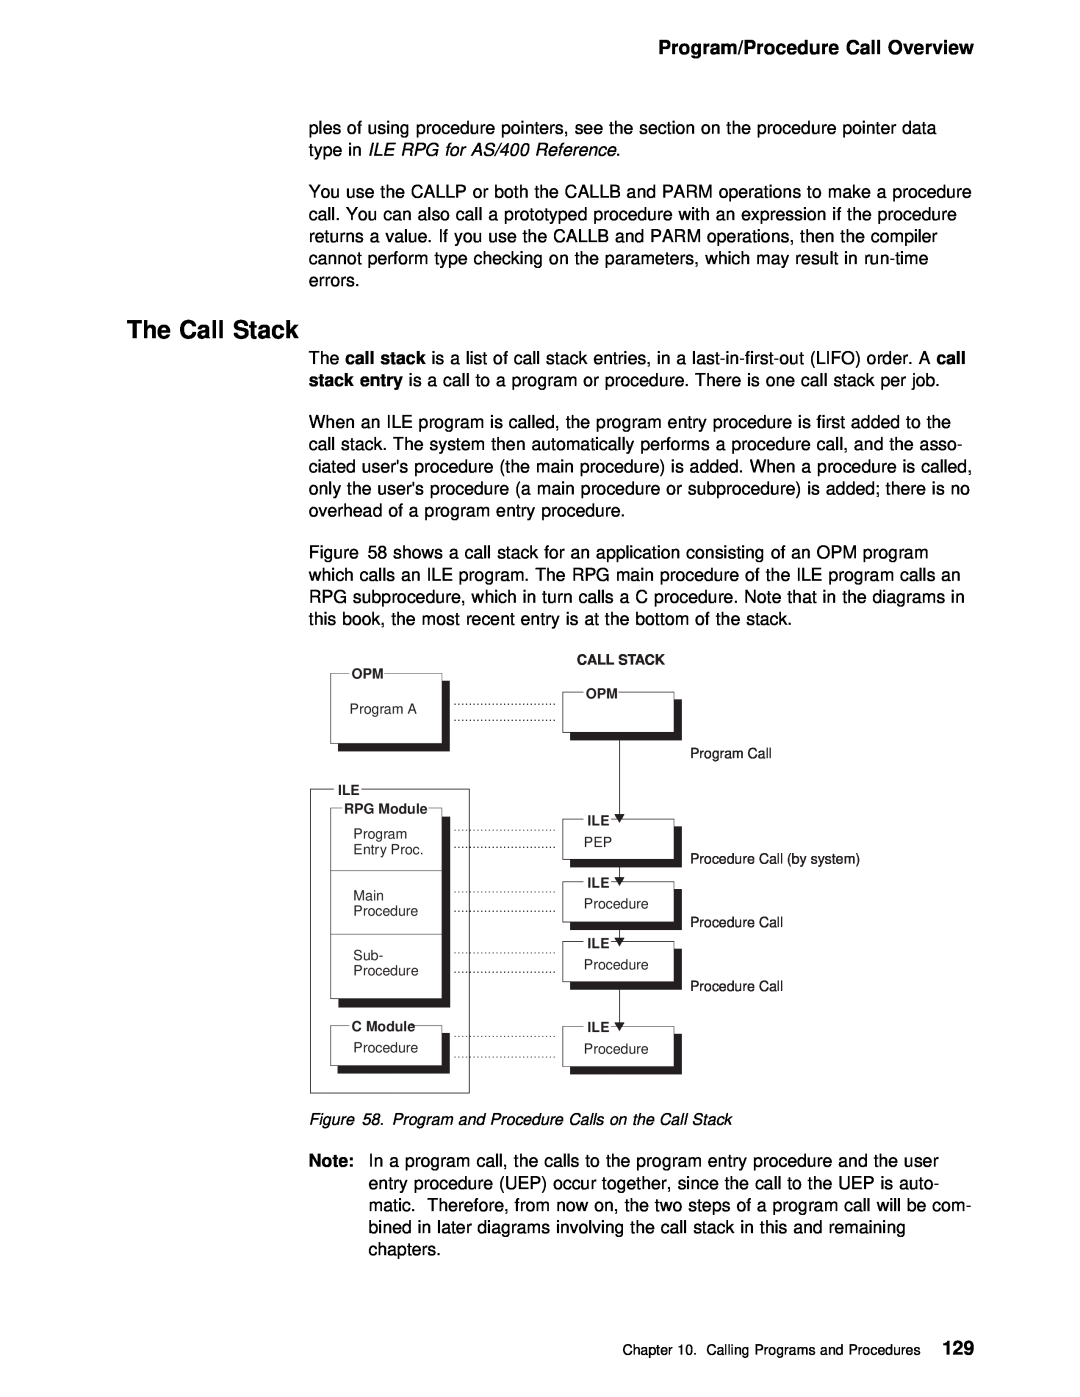 IBM AS/400 manual The Call Stack, Program/Procedure Call Overview, The call stack 